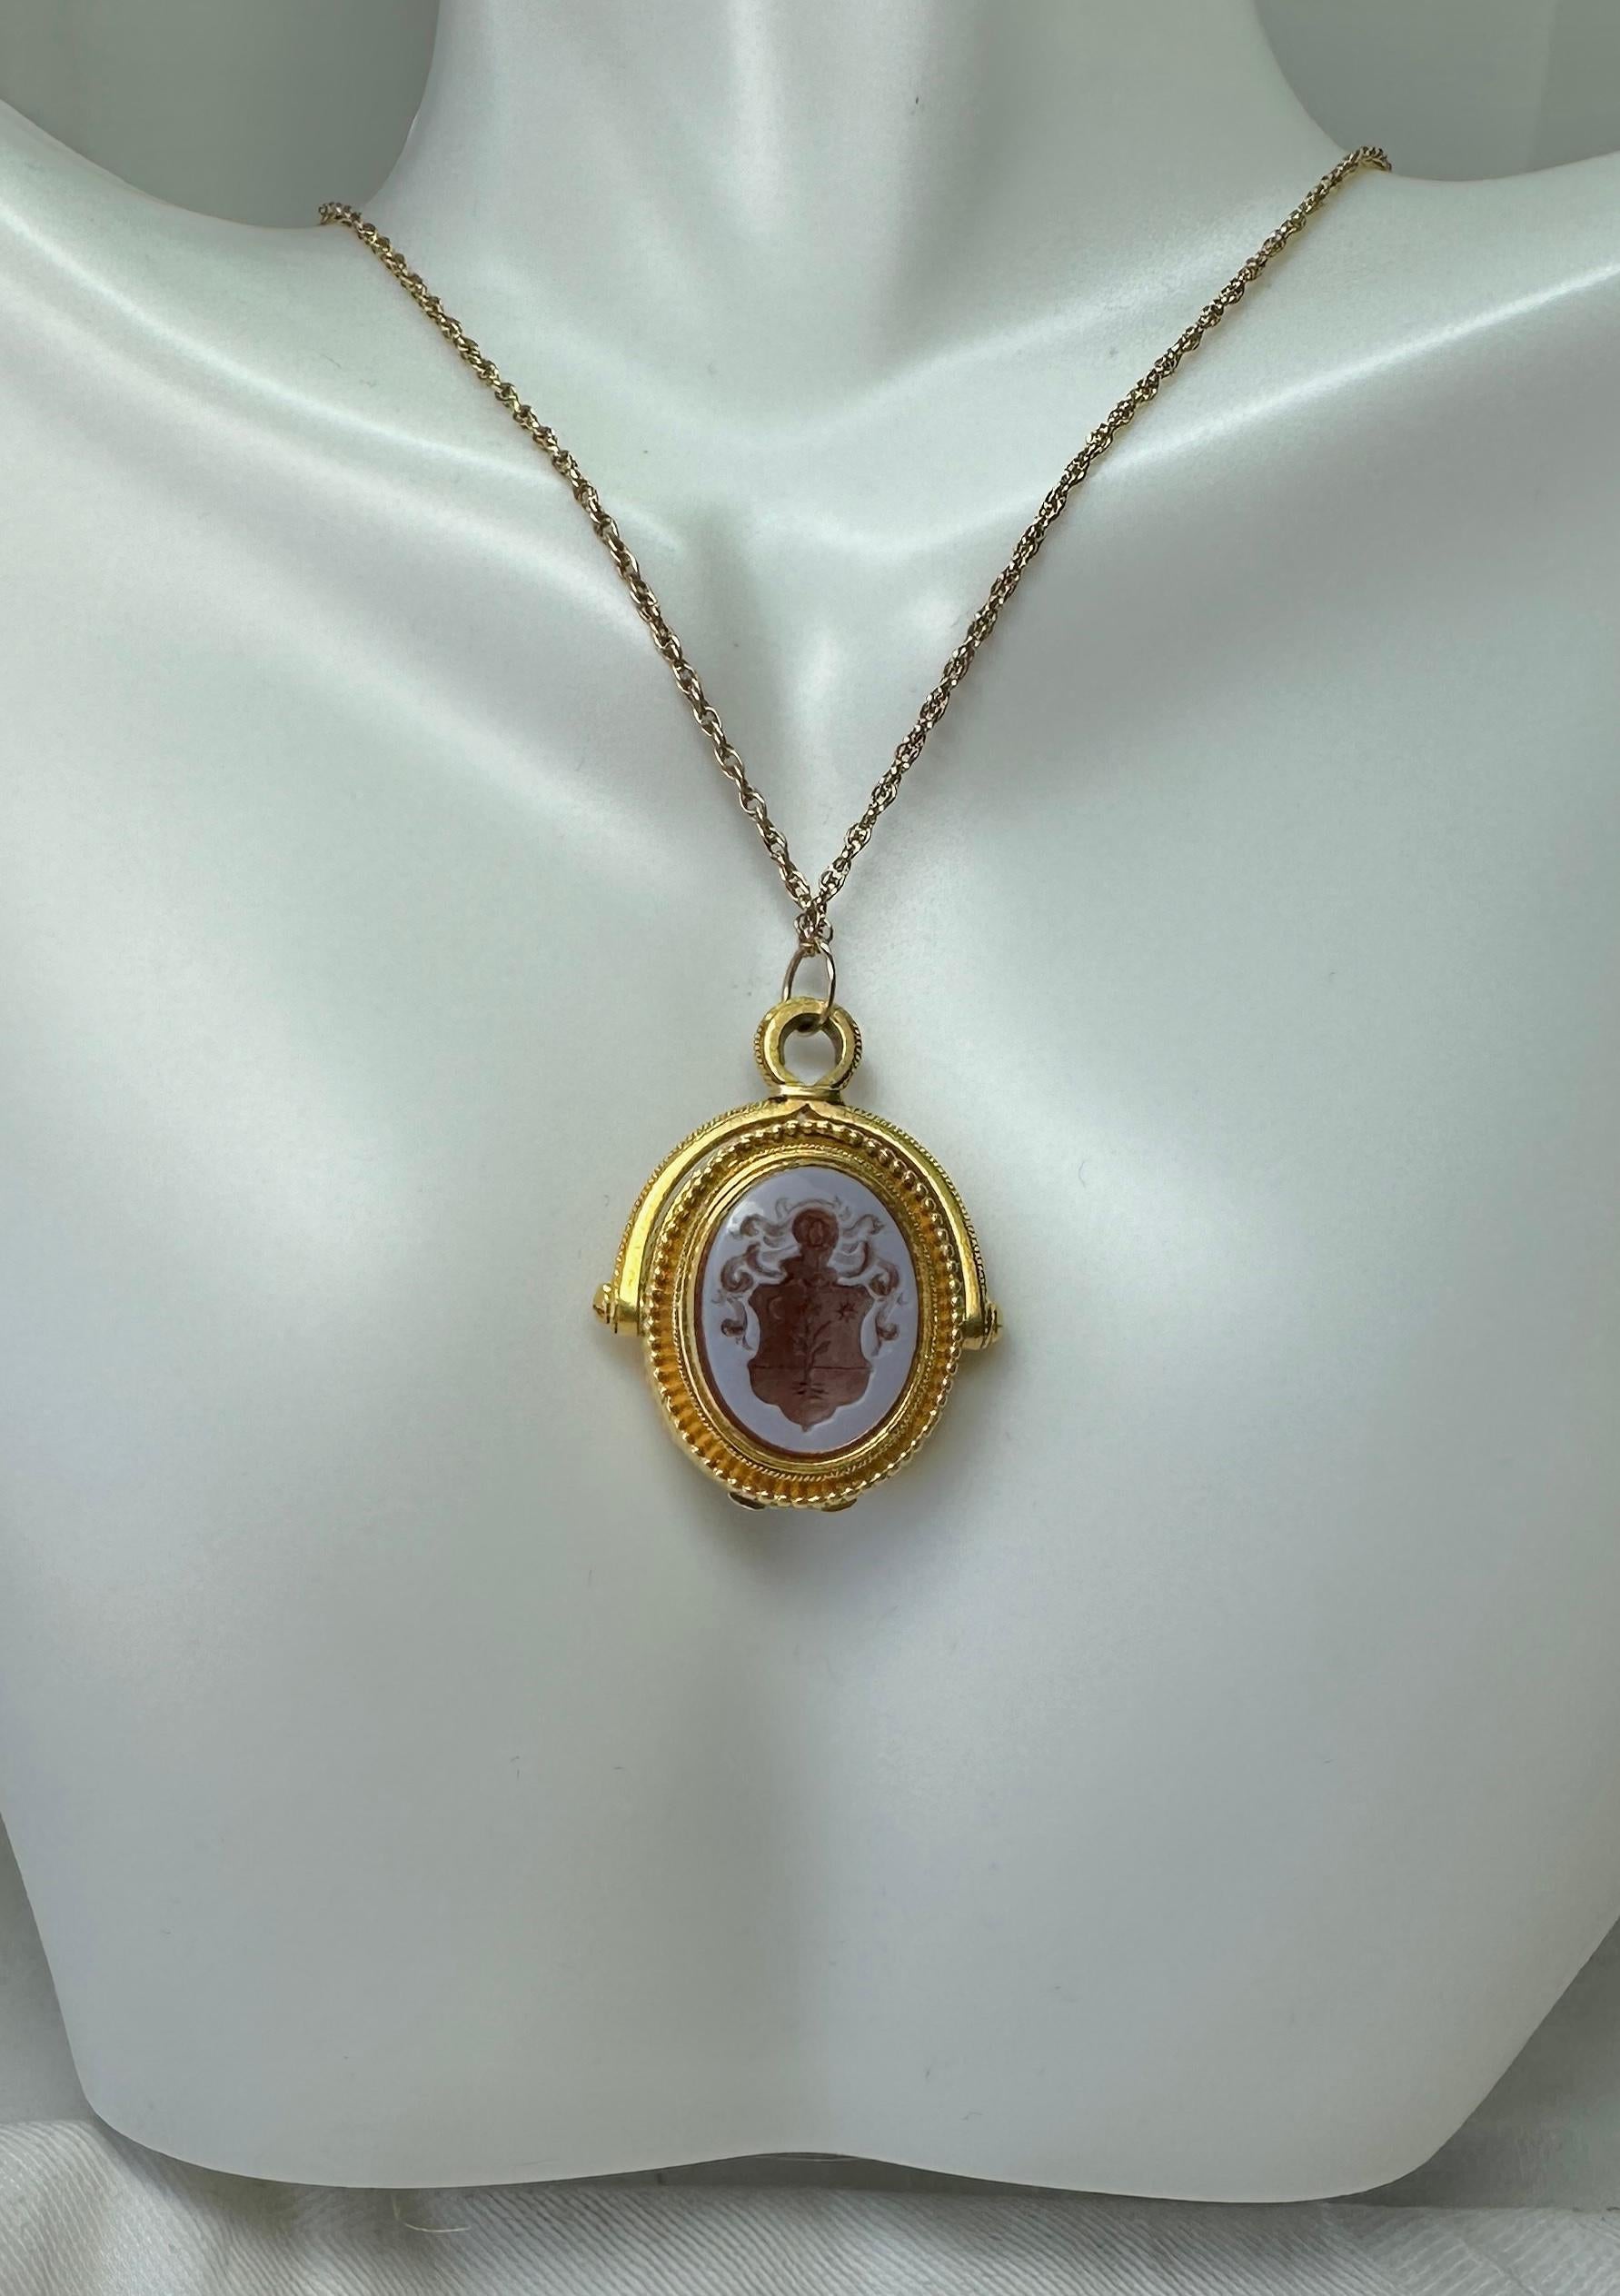 This is a rare and wonderful antique carved Crest Shield Victorian Etruscan Revival Locket Pendant with Banded Agate or Sardonyx gems.  The locket is in the Etruscan Revival style. One side is adorned with a carved banded agate intaglio with an